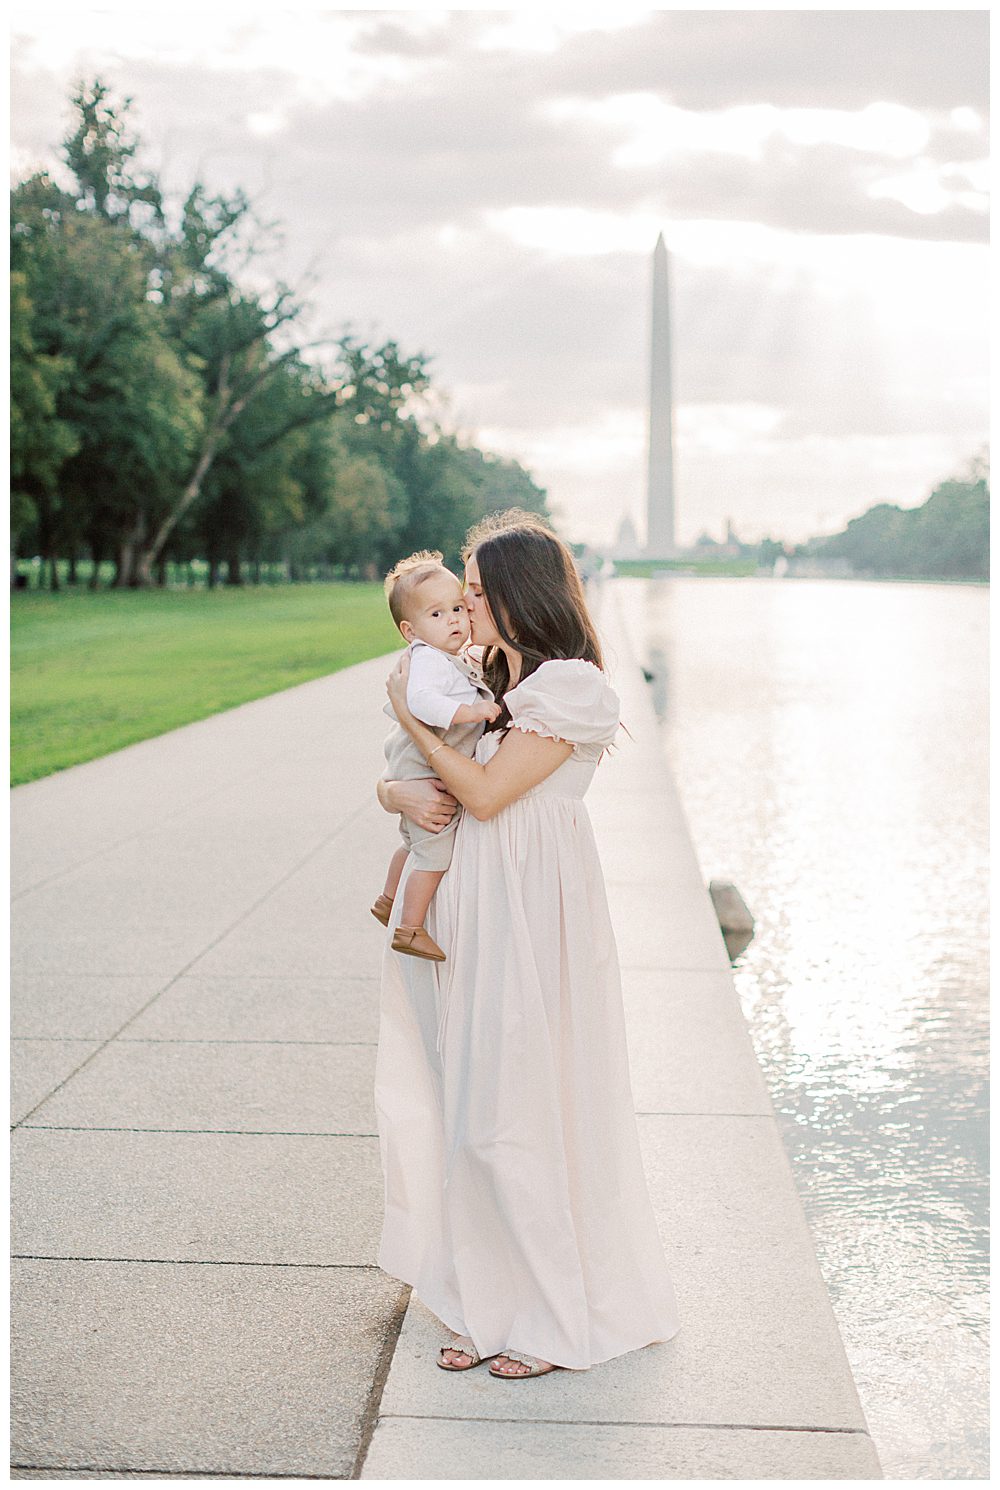 Mother kisses her toddler's cheek as she stands by the DC reflection pool during DC Monuments Family Photo Session.